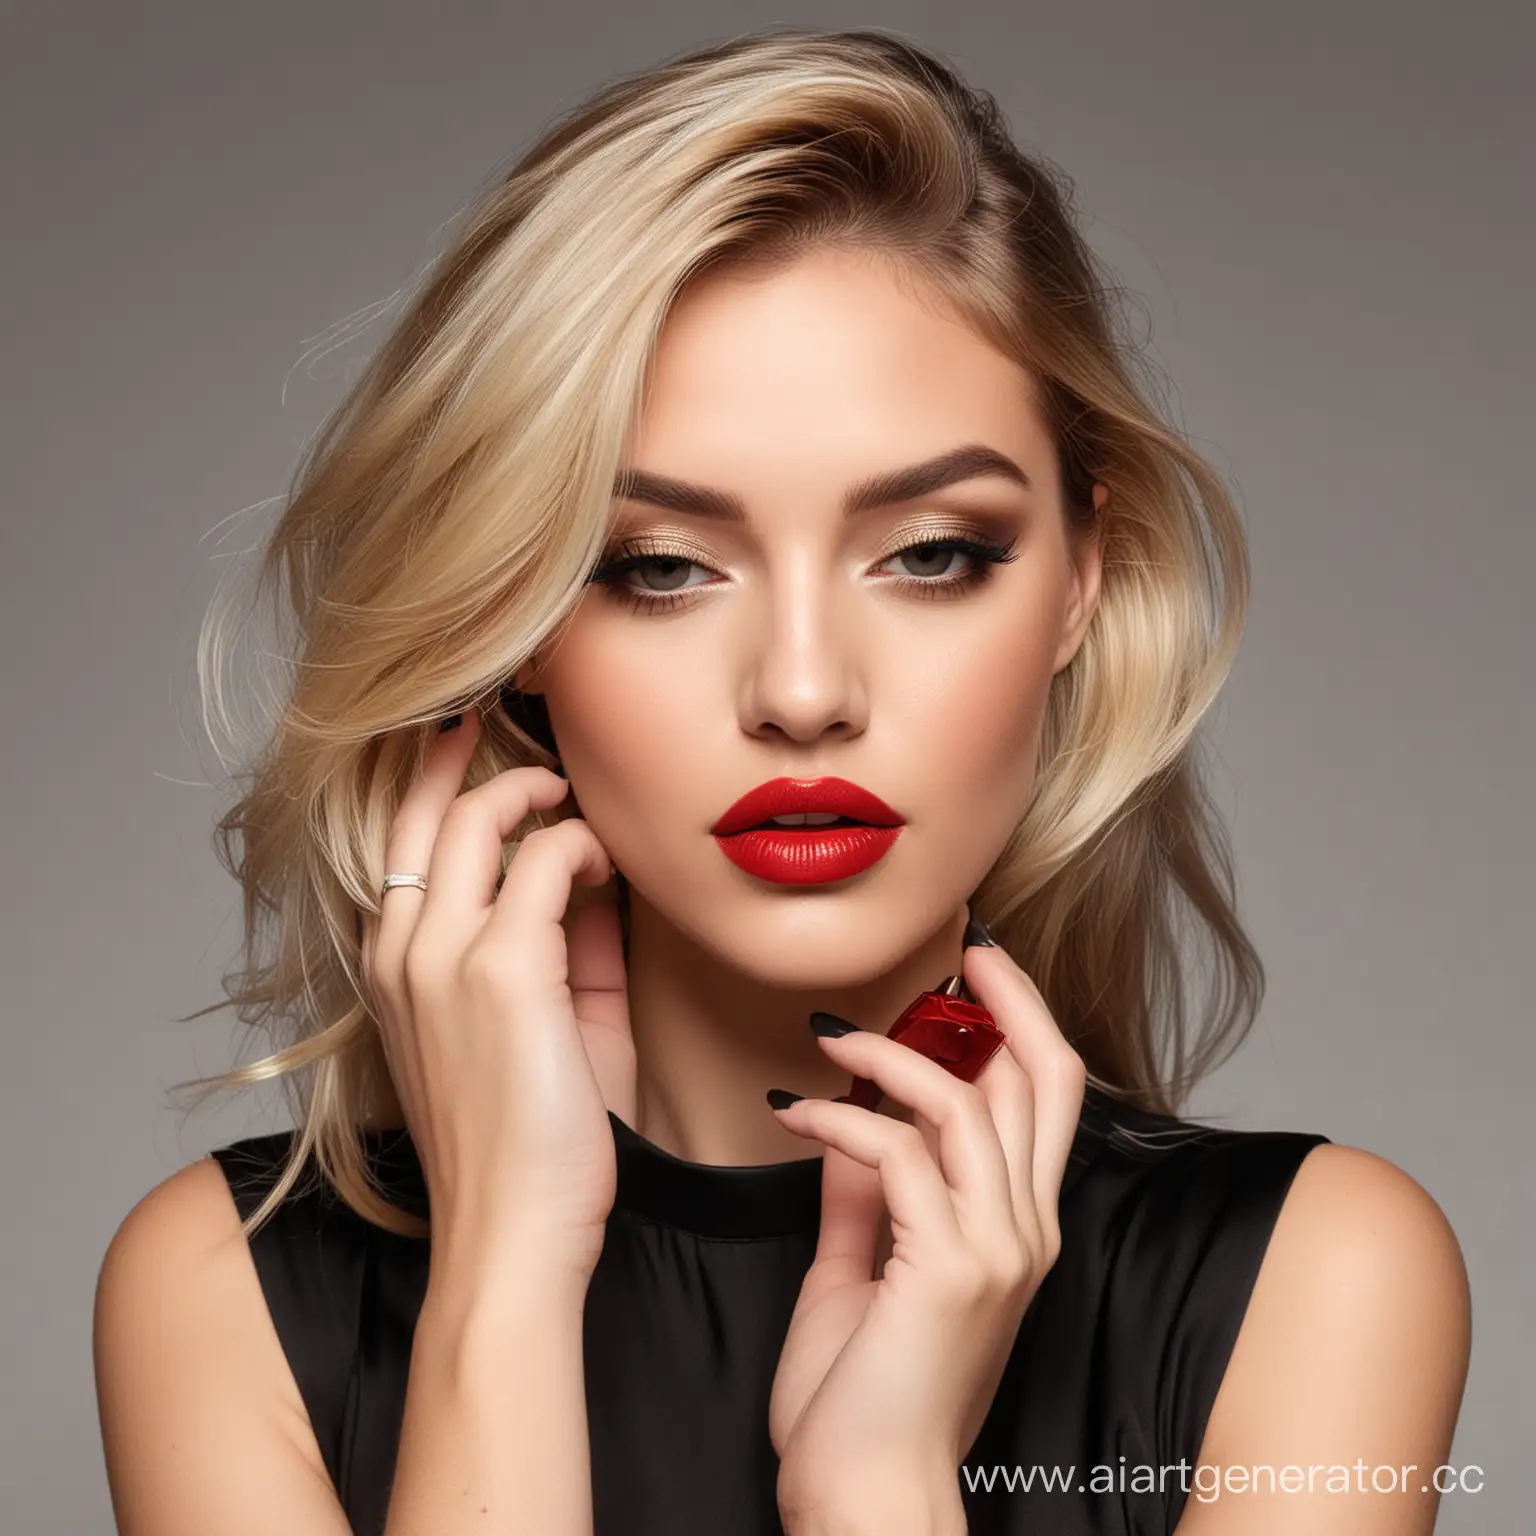 Elegant-Woman-in-Black-Dress-with-Red-Lips-and-Blonde-Hair-Perfumed-Beauty-Portrait